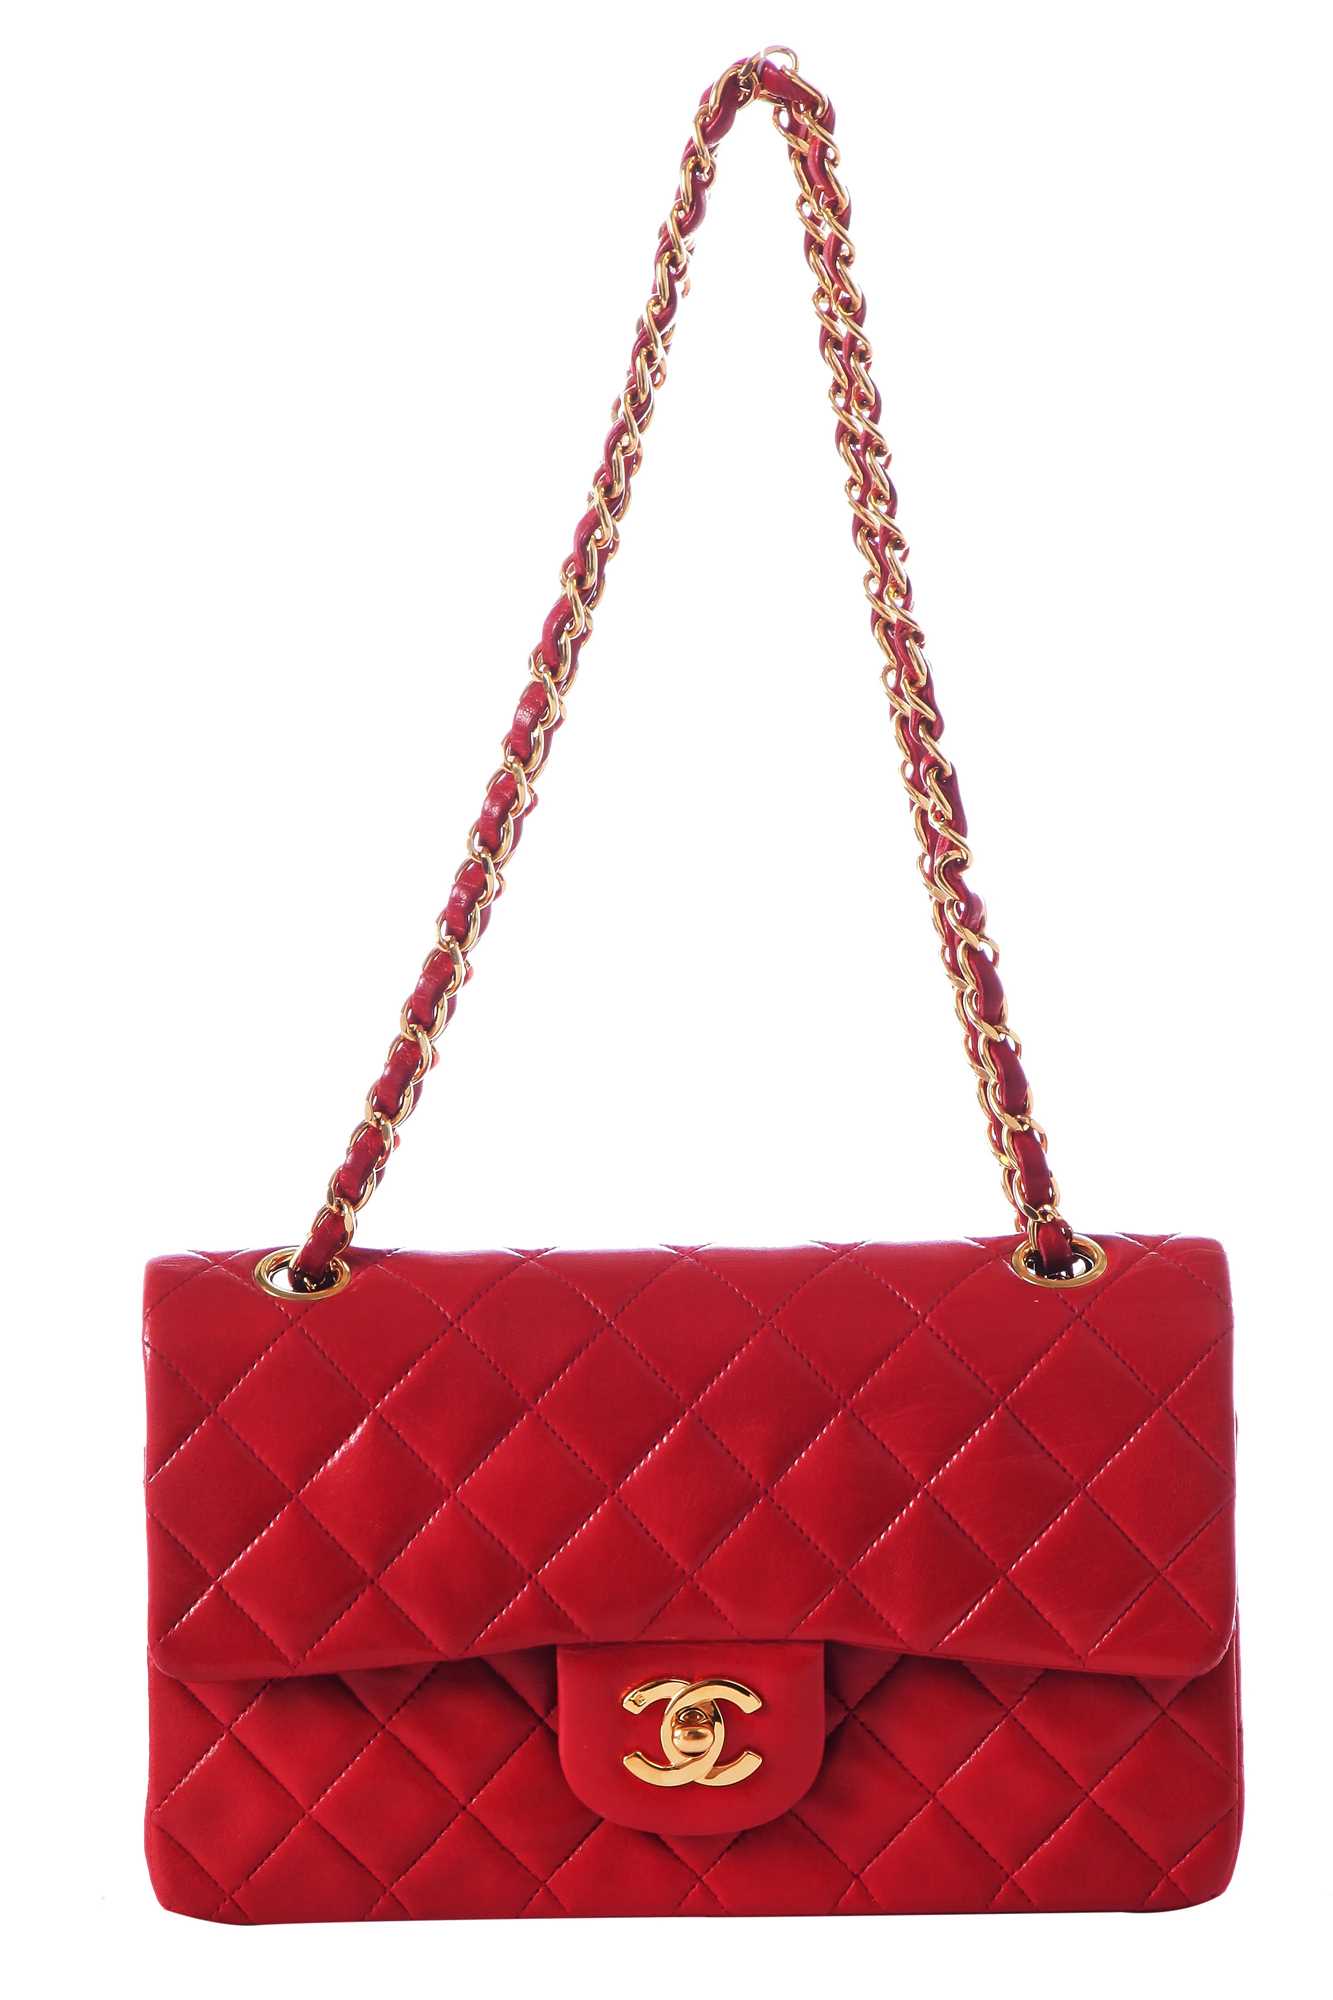 Lot 2 - A Chanel quilted red lambskin leather classic